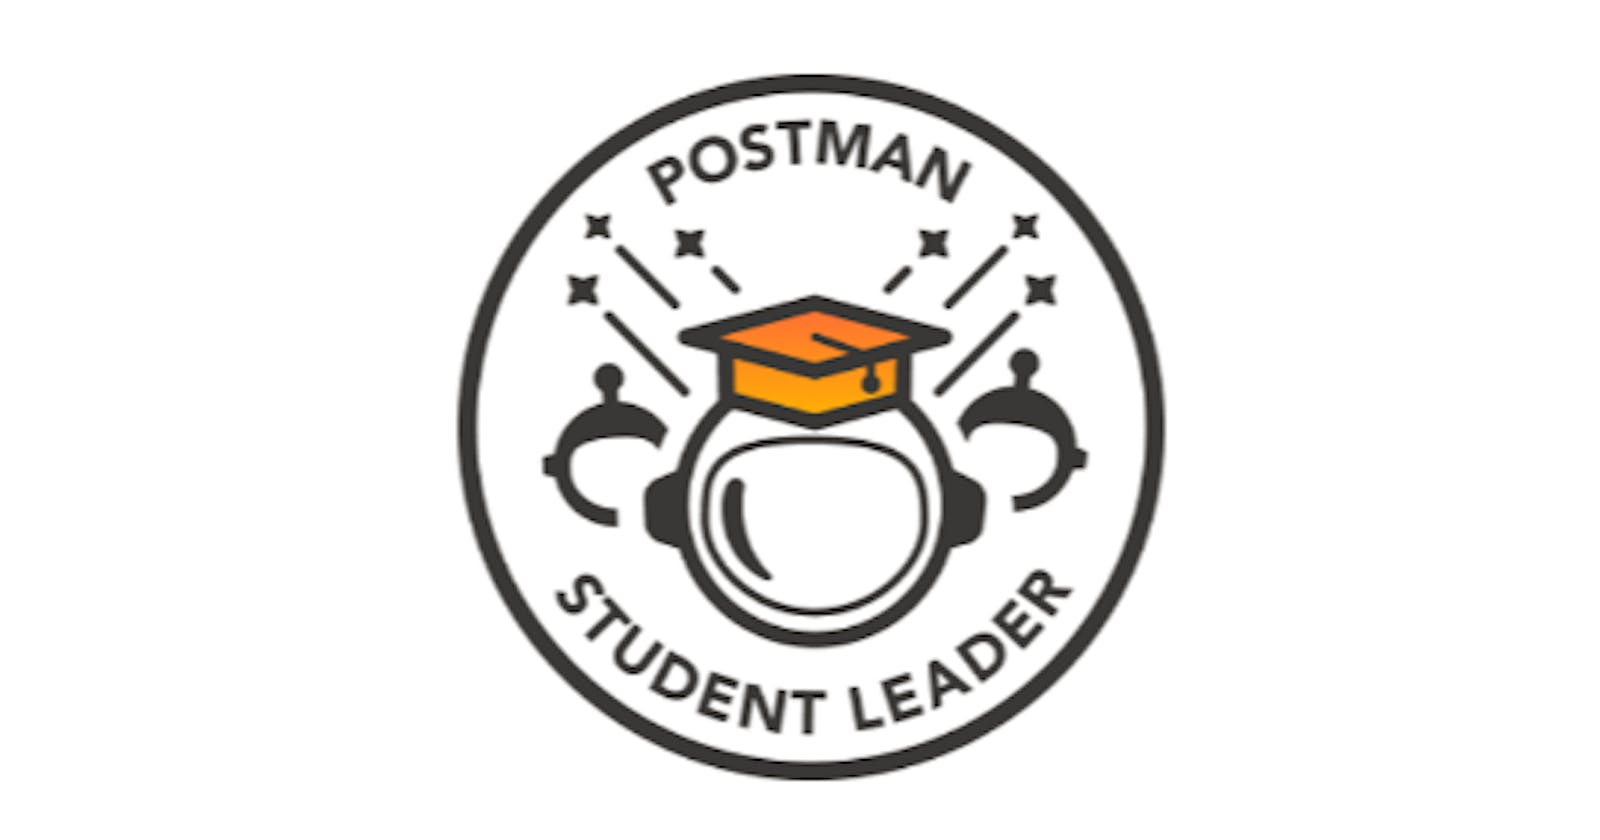 My journey of becoming "Postman Student Leader"